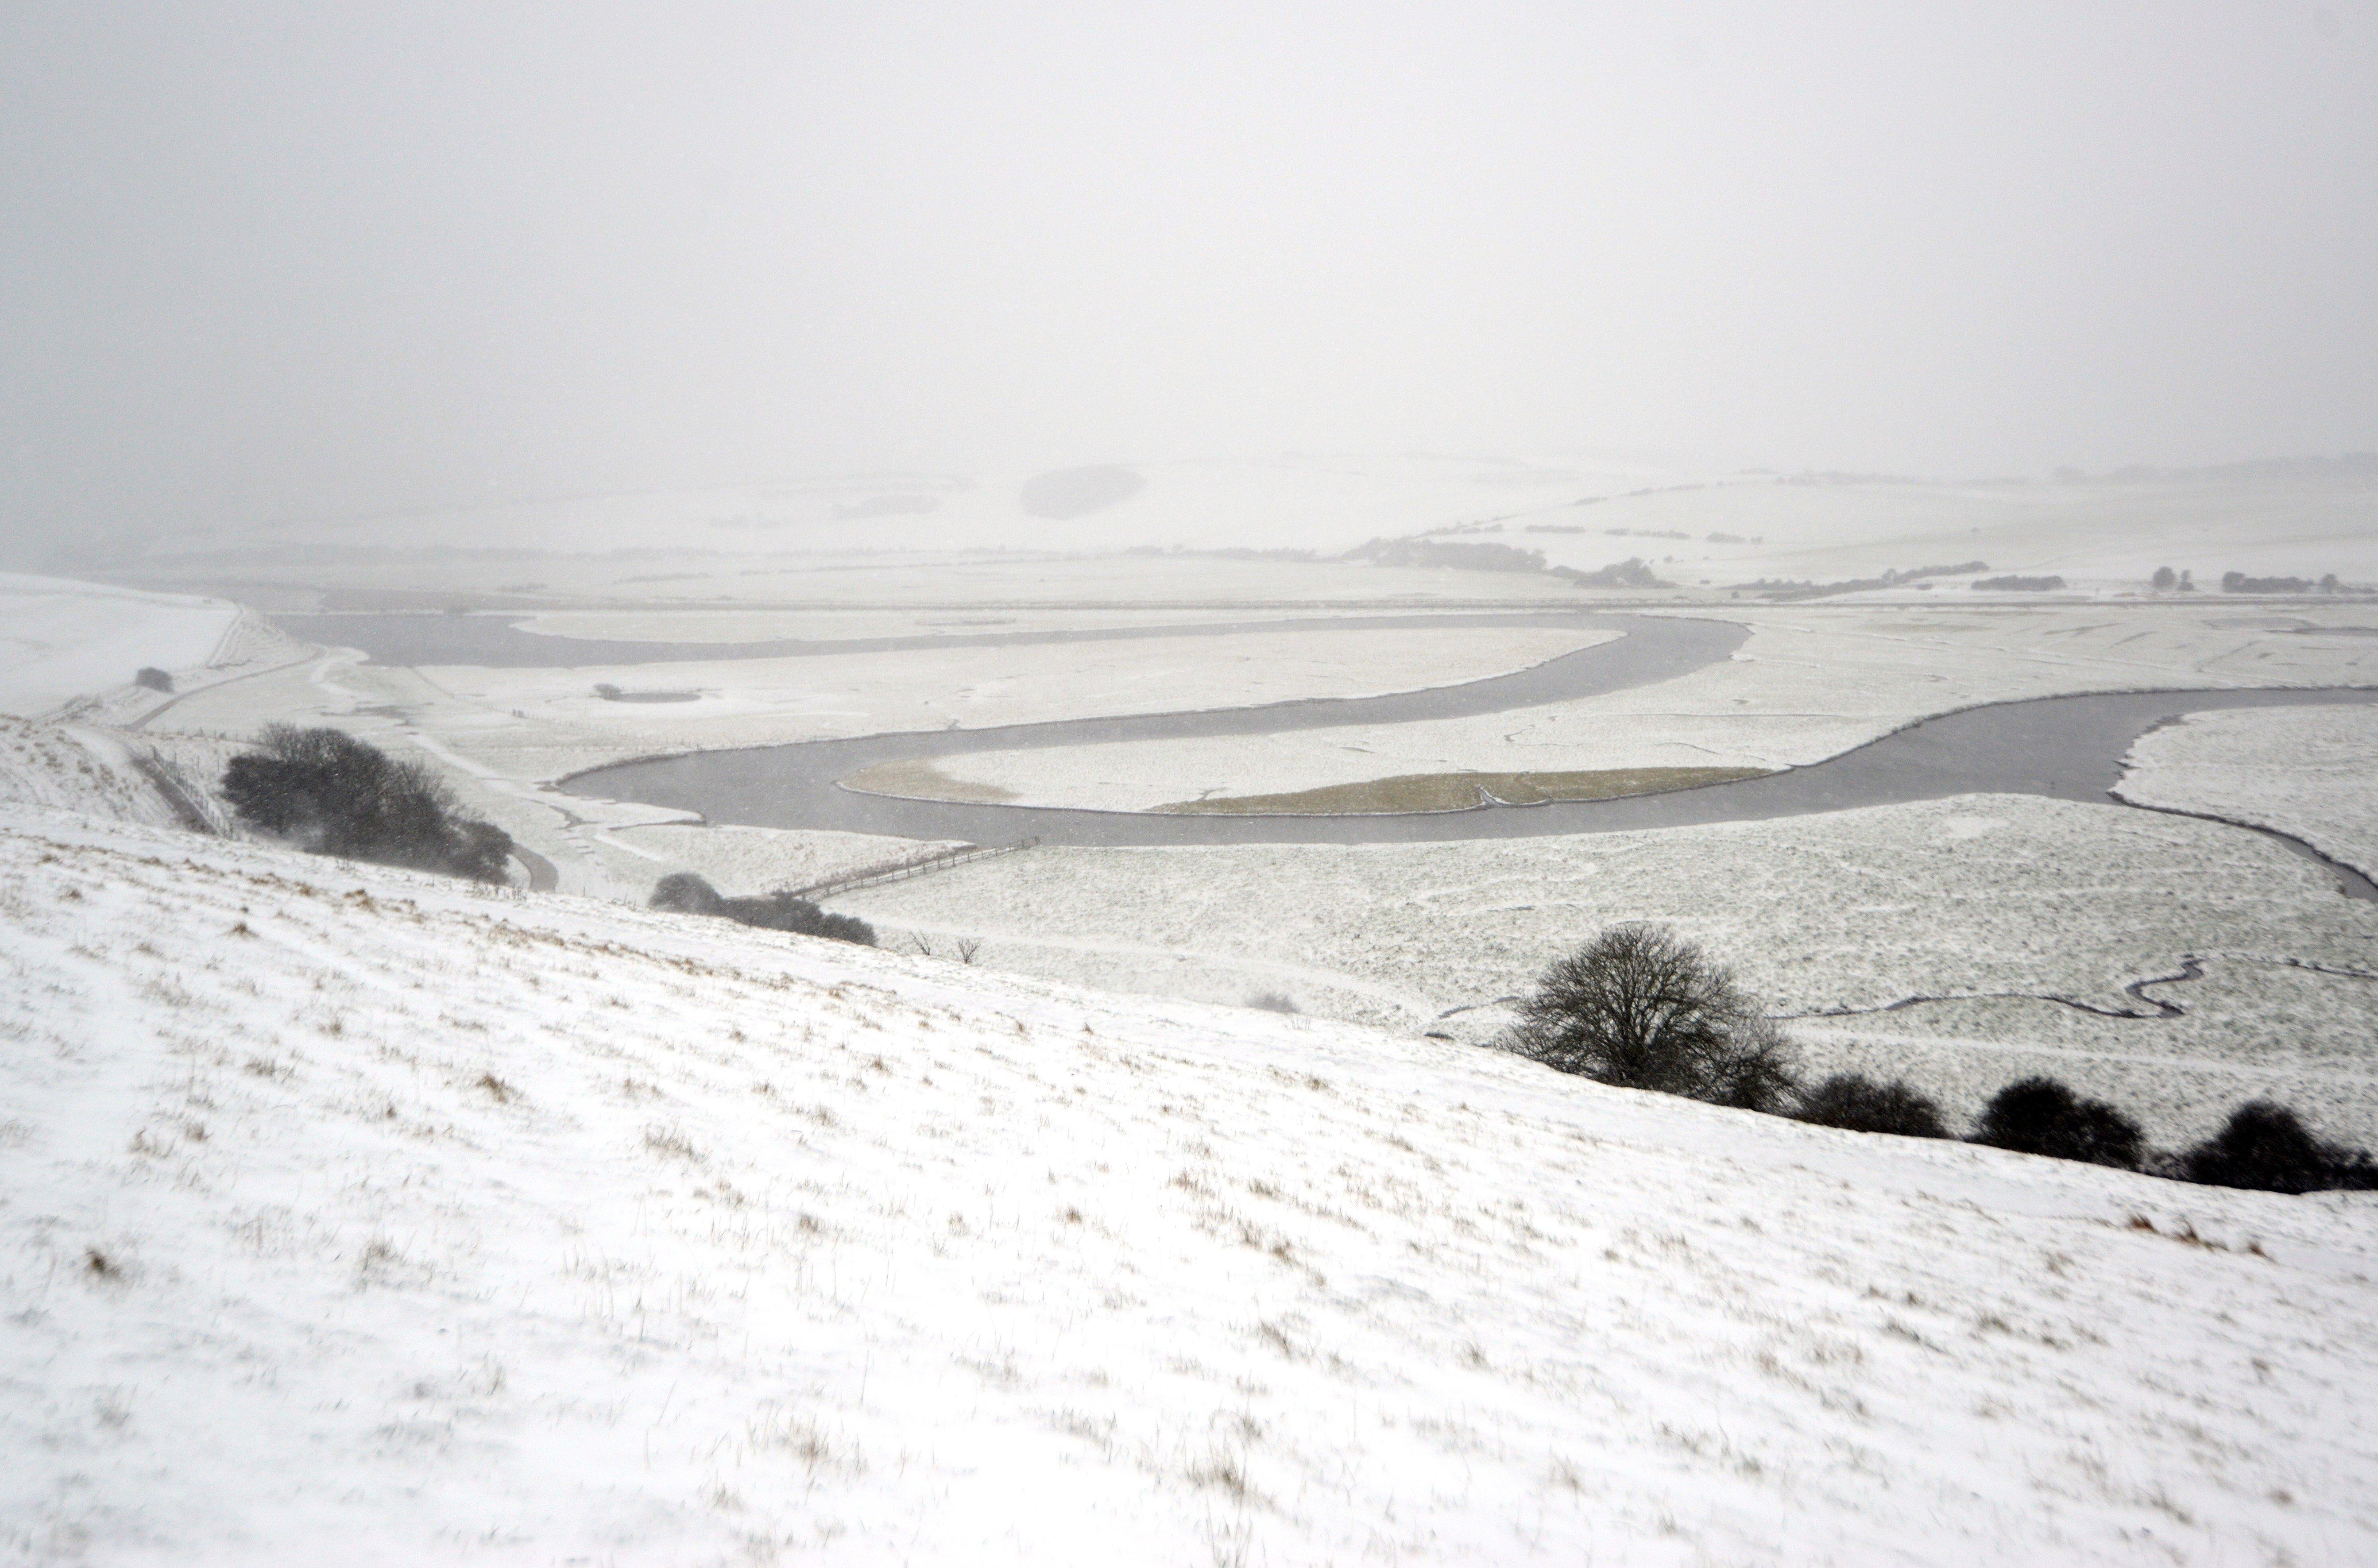 Cuckmere Haven was blanketed in snow in March 2013